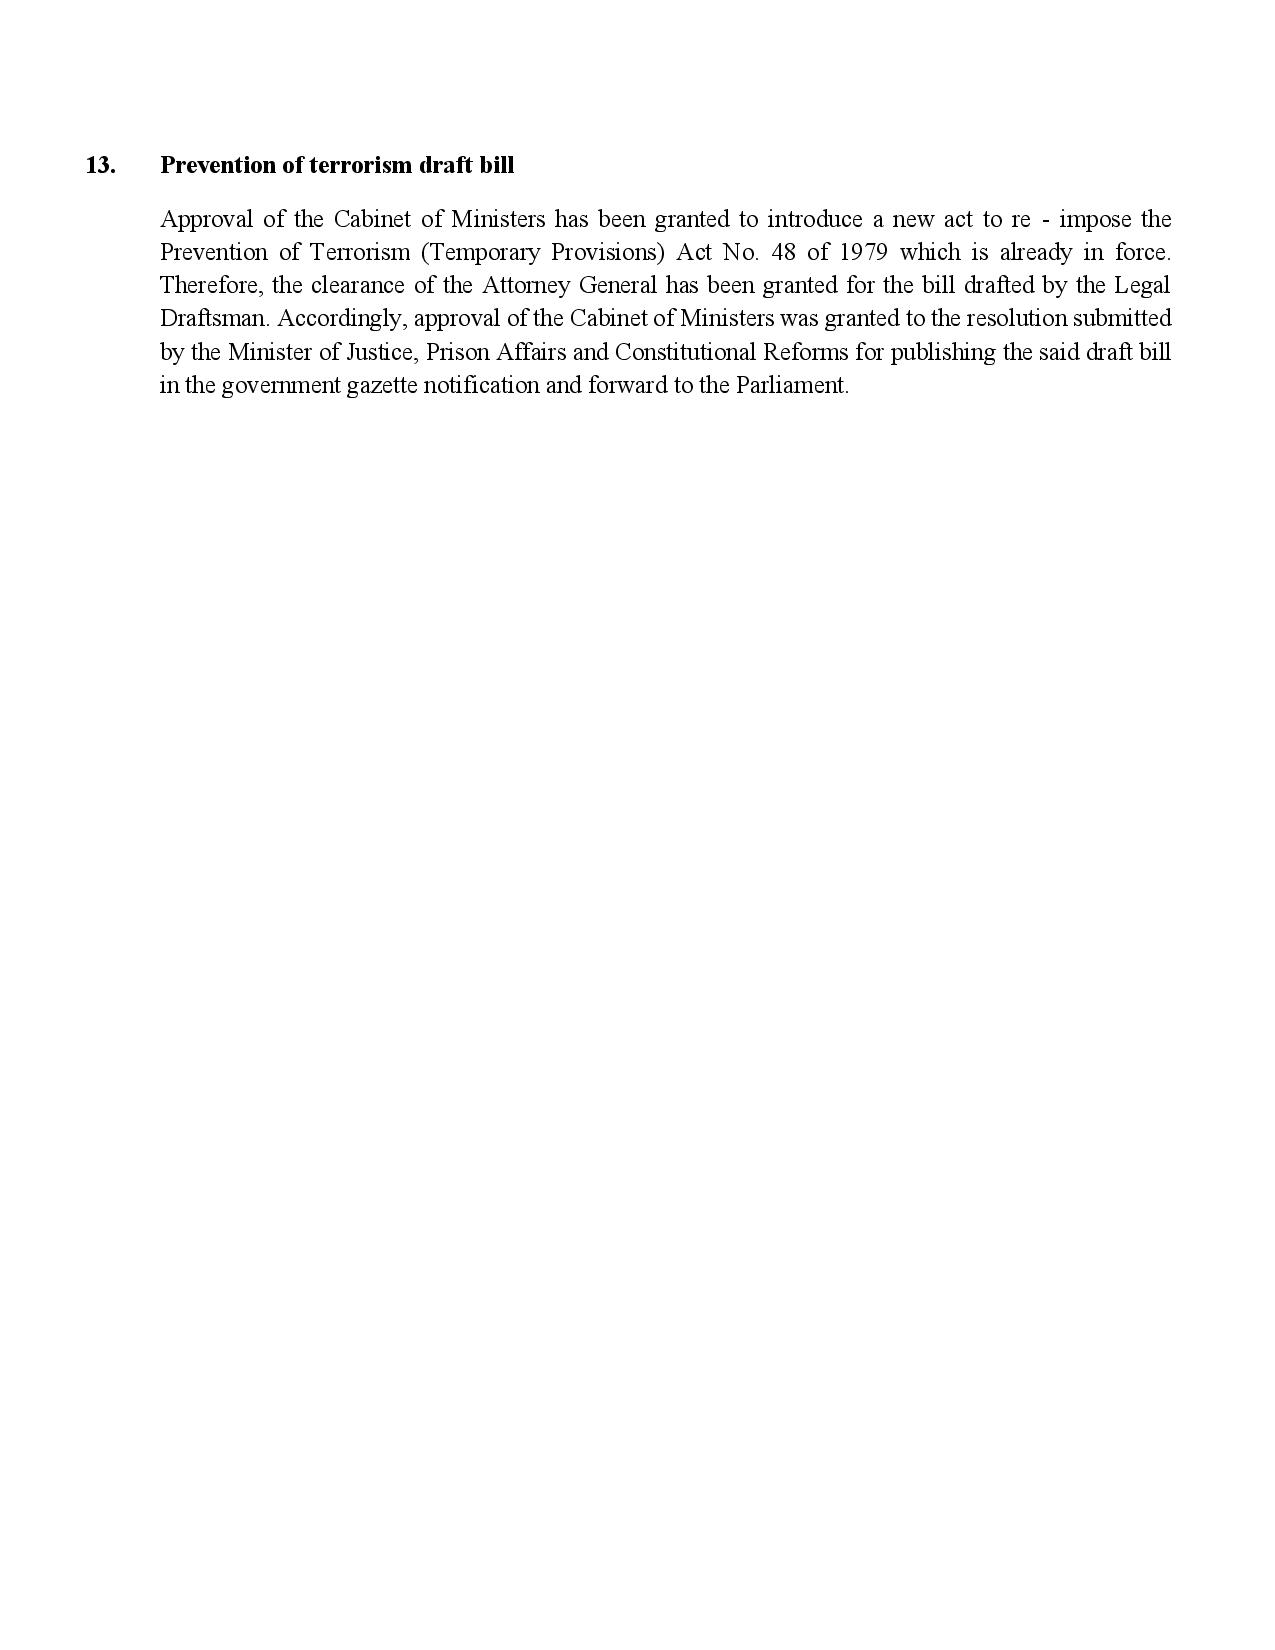 Cabinet Decision on 27.02.2023 English page 005